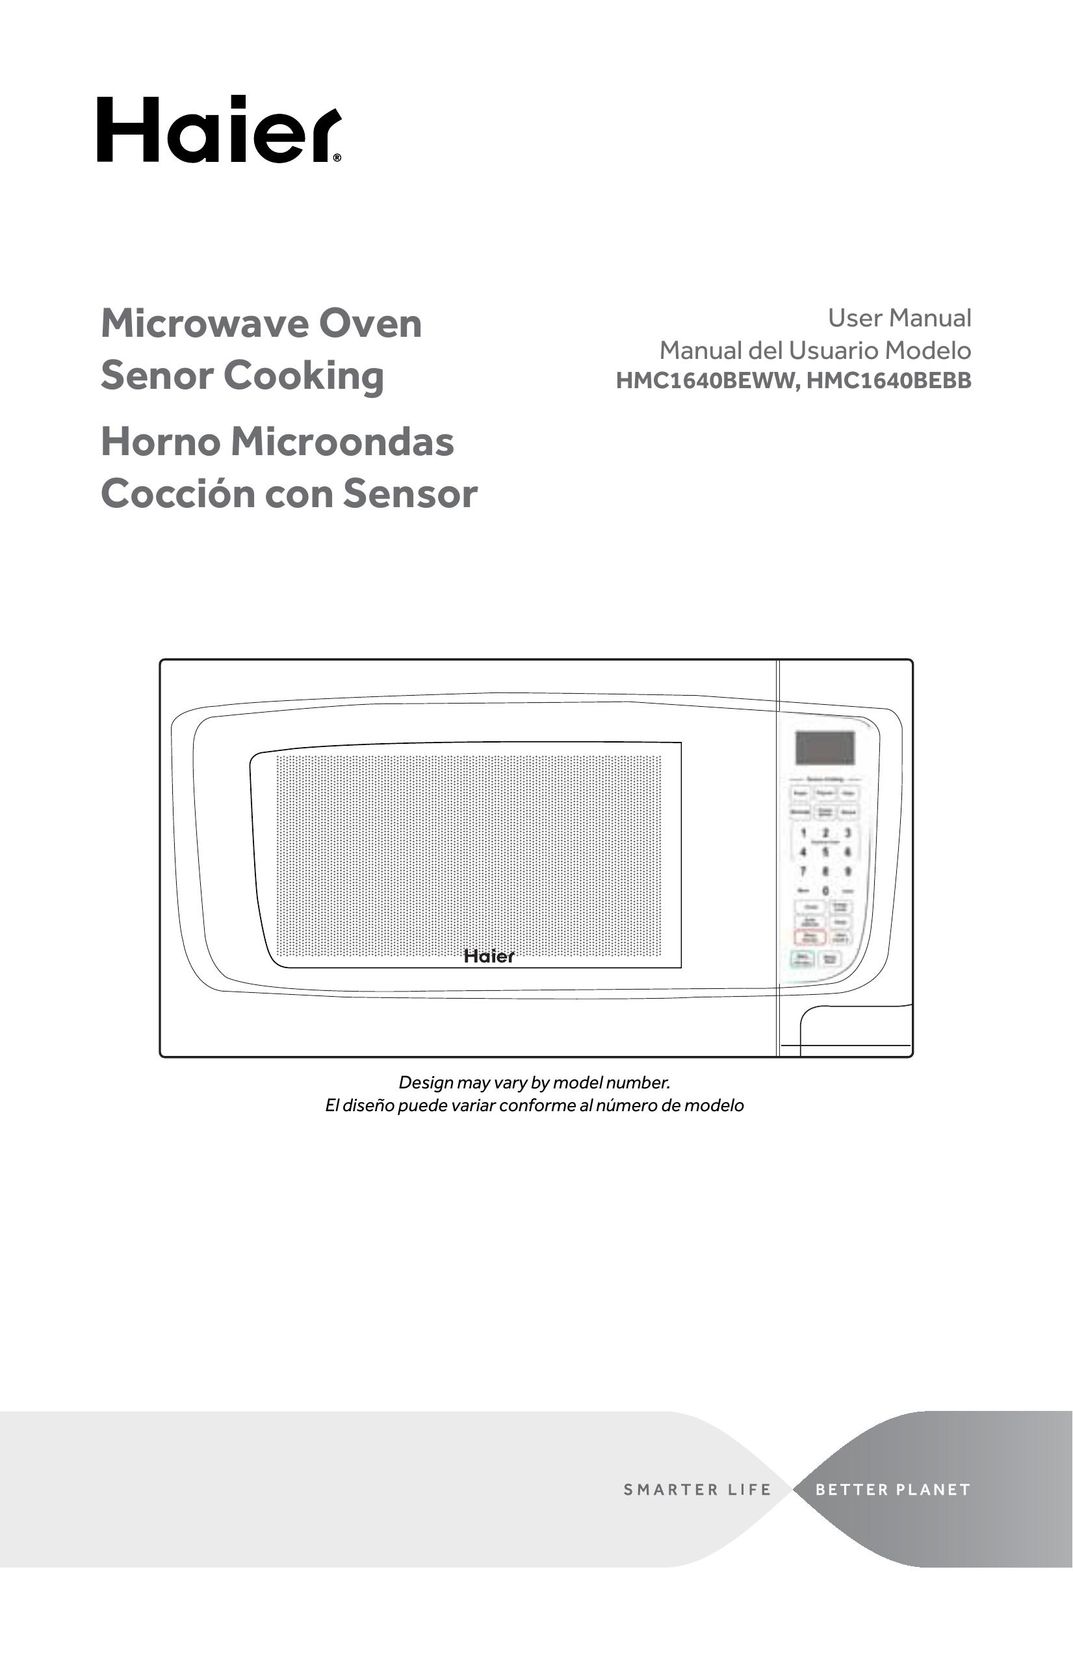 Haier Haier Microwave Oven Microwave Oven User Manual